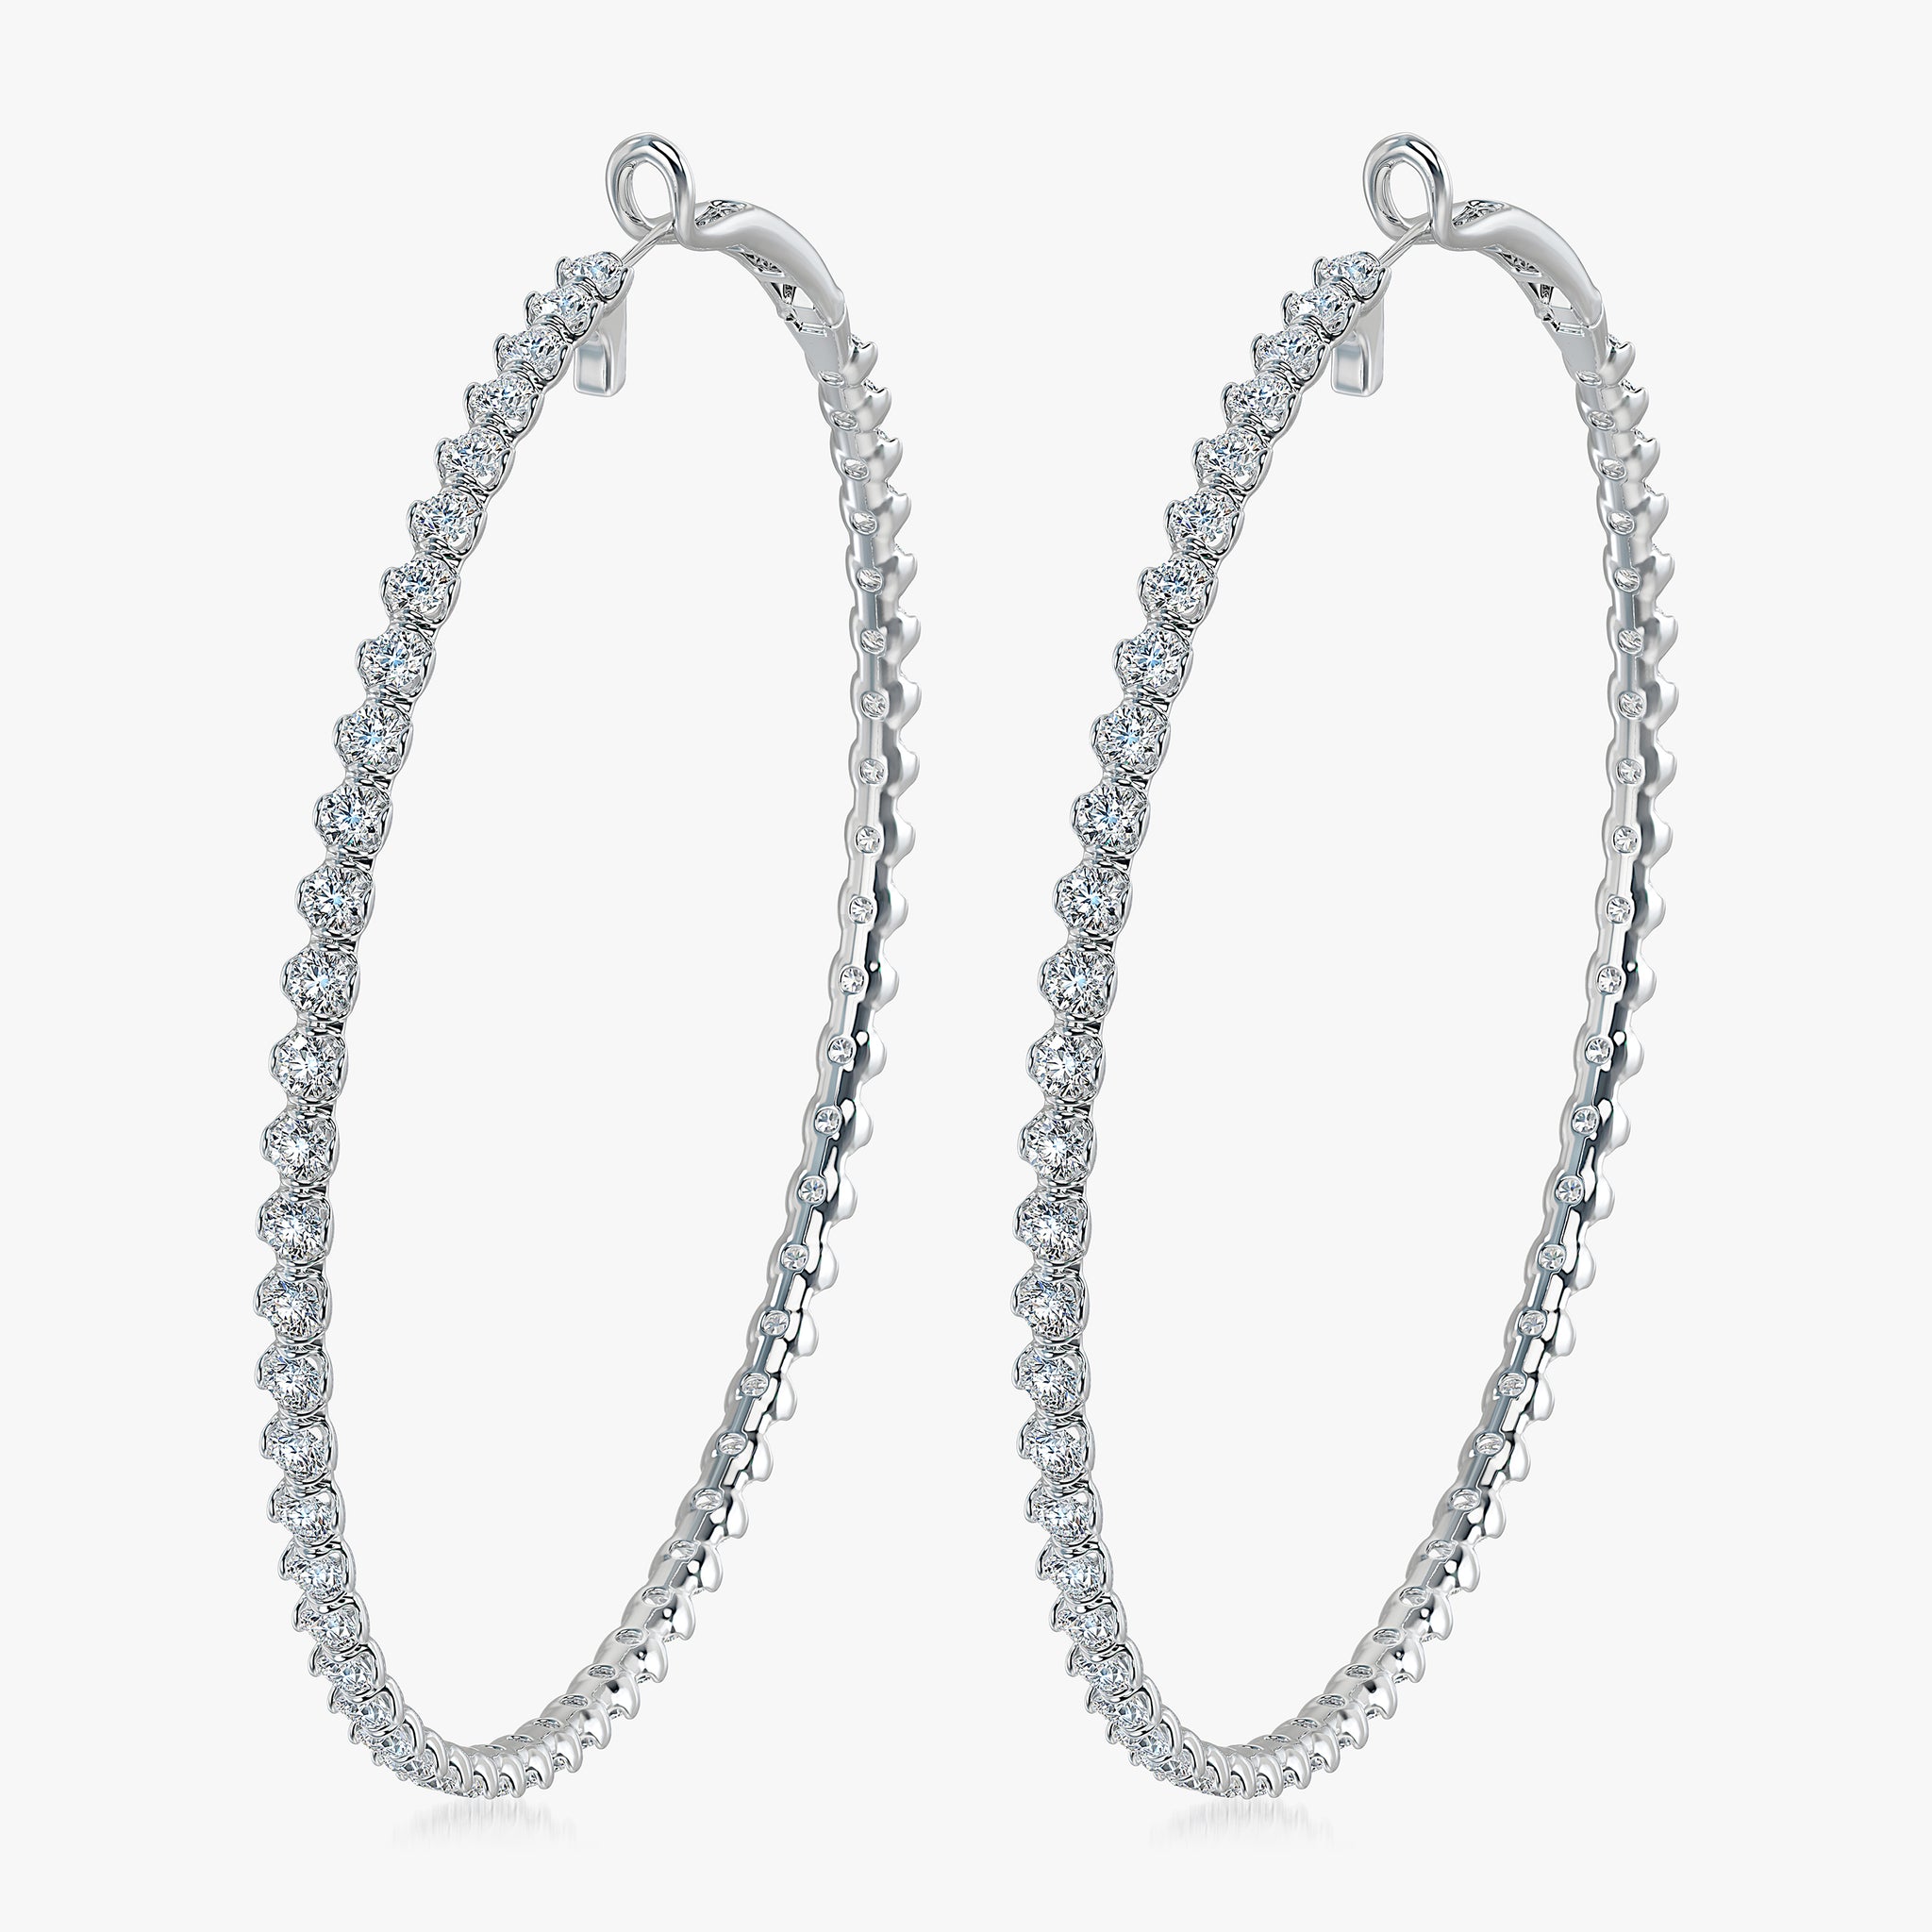 J'EVAR 18KT White Gold Couture 20 CT ALTR Diamond Hoop Earrings Perspective View